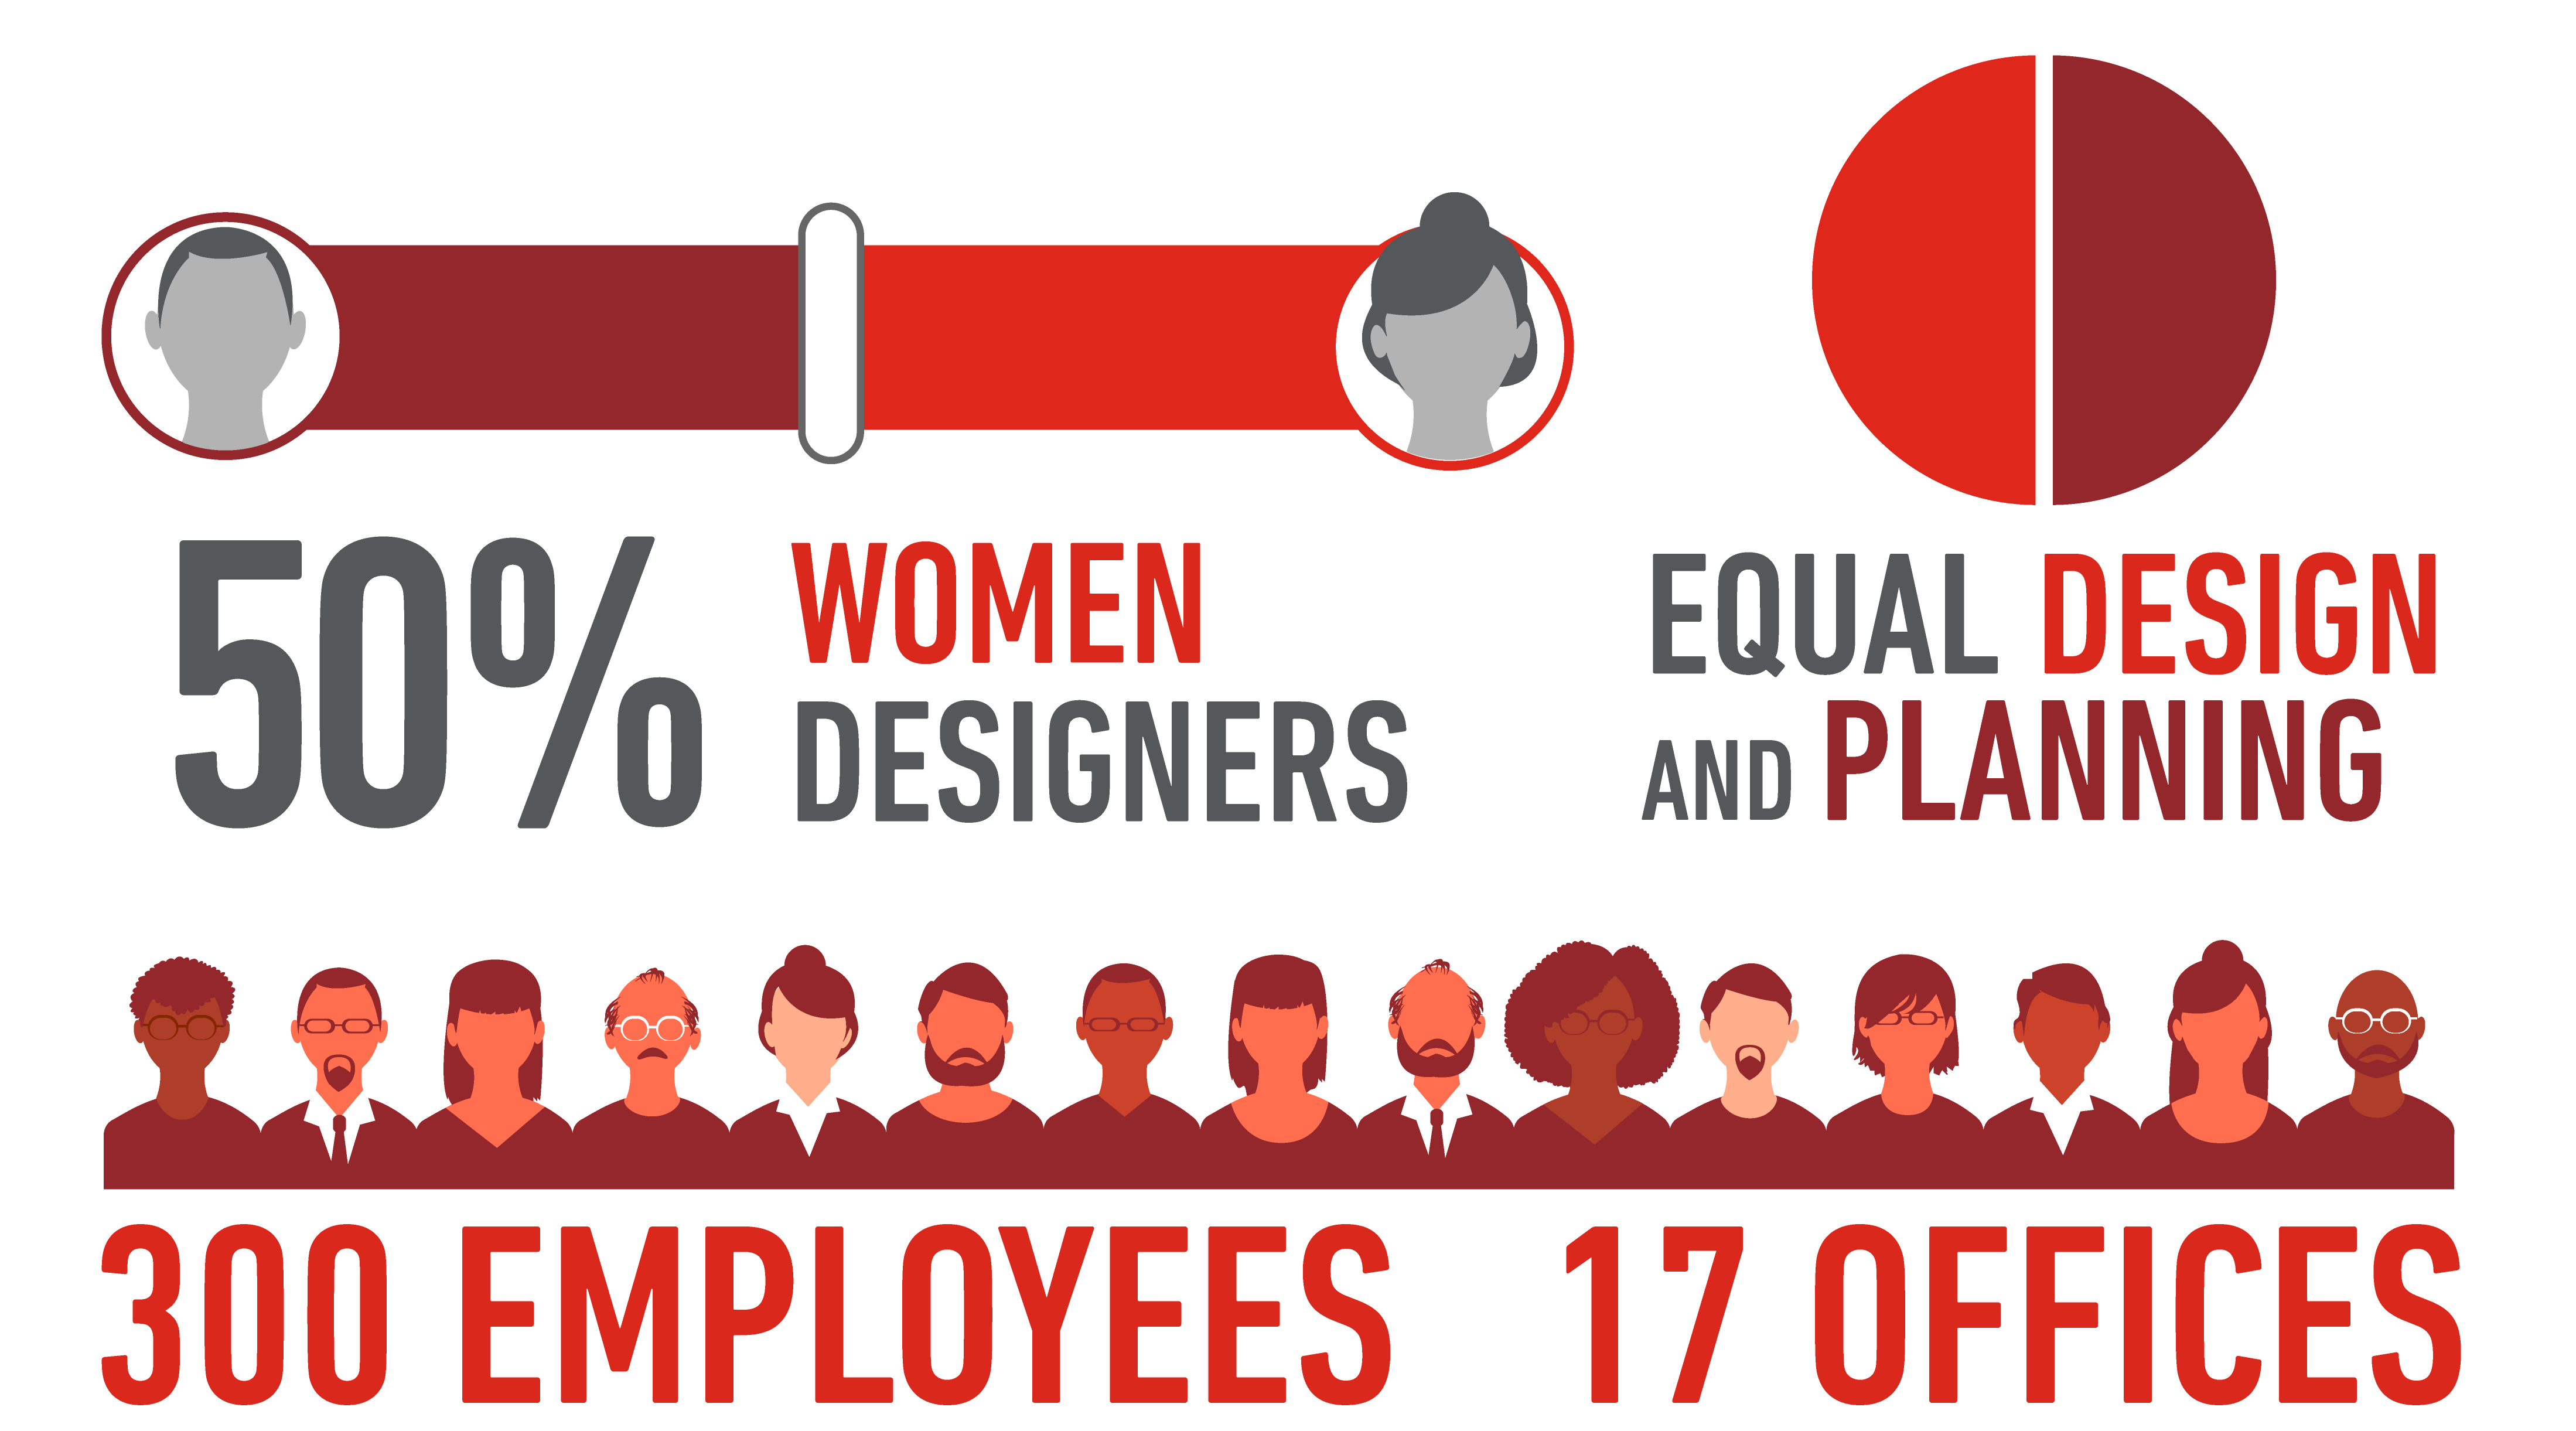 300 Employees, 17 offices, 50% women designers, equal design and planning